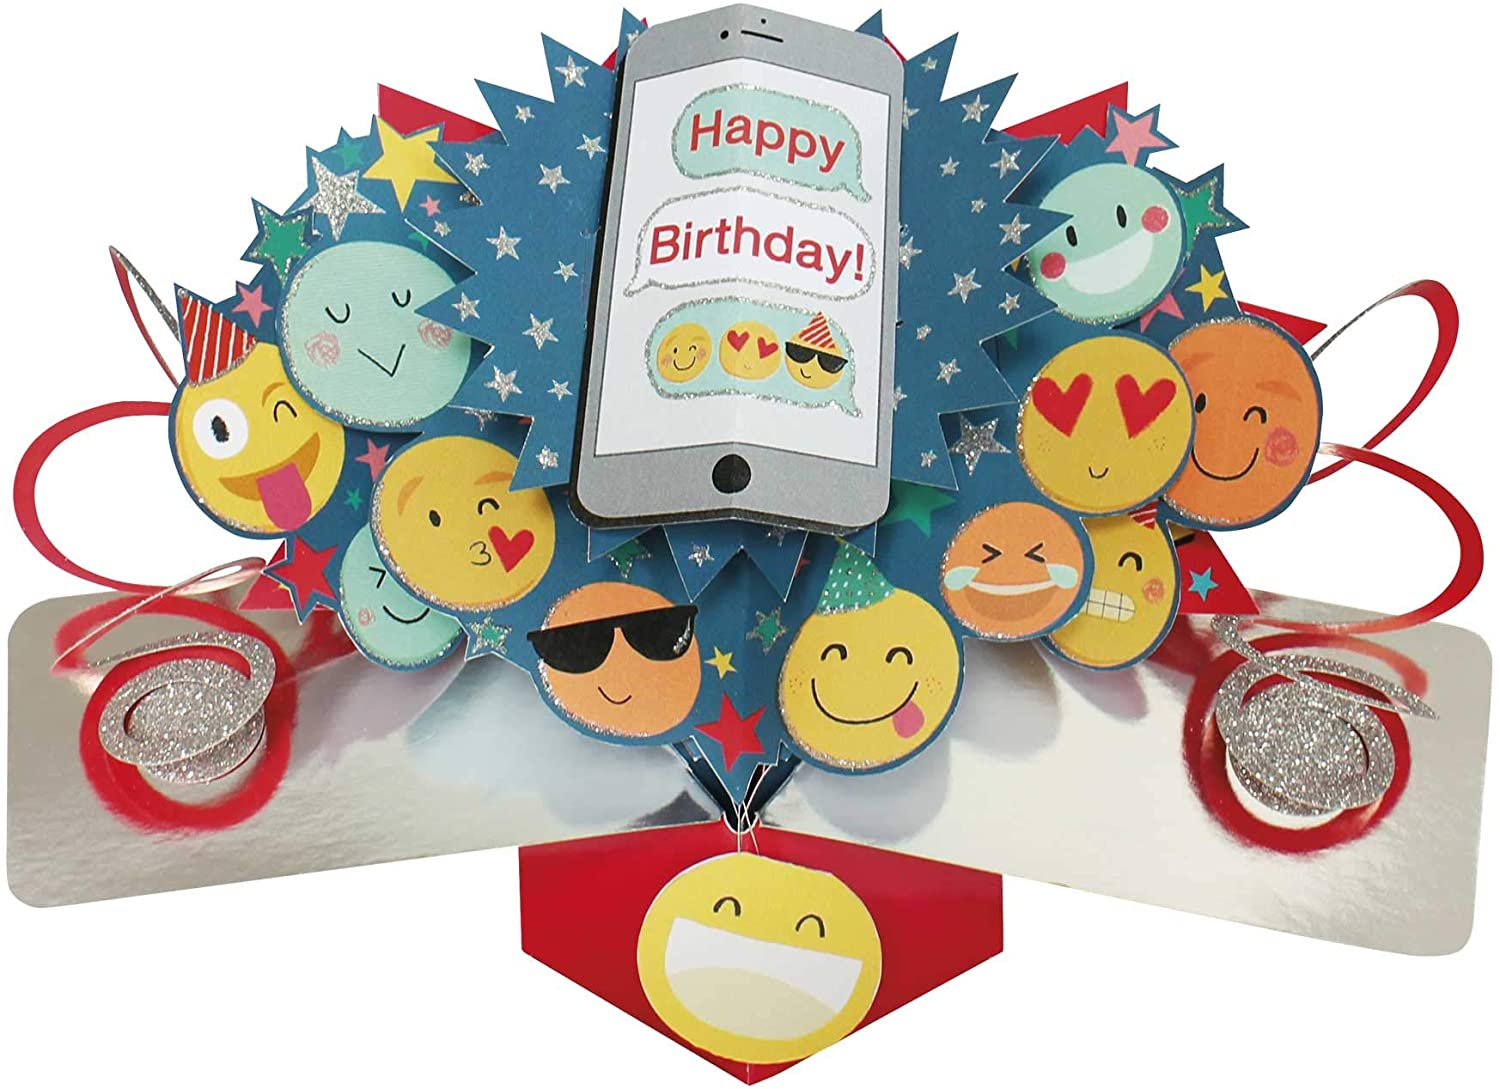 Second Nature Mailable Happy Birthday Emoji Pop Up Greeting Card - POP167